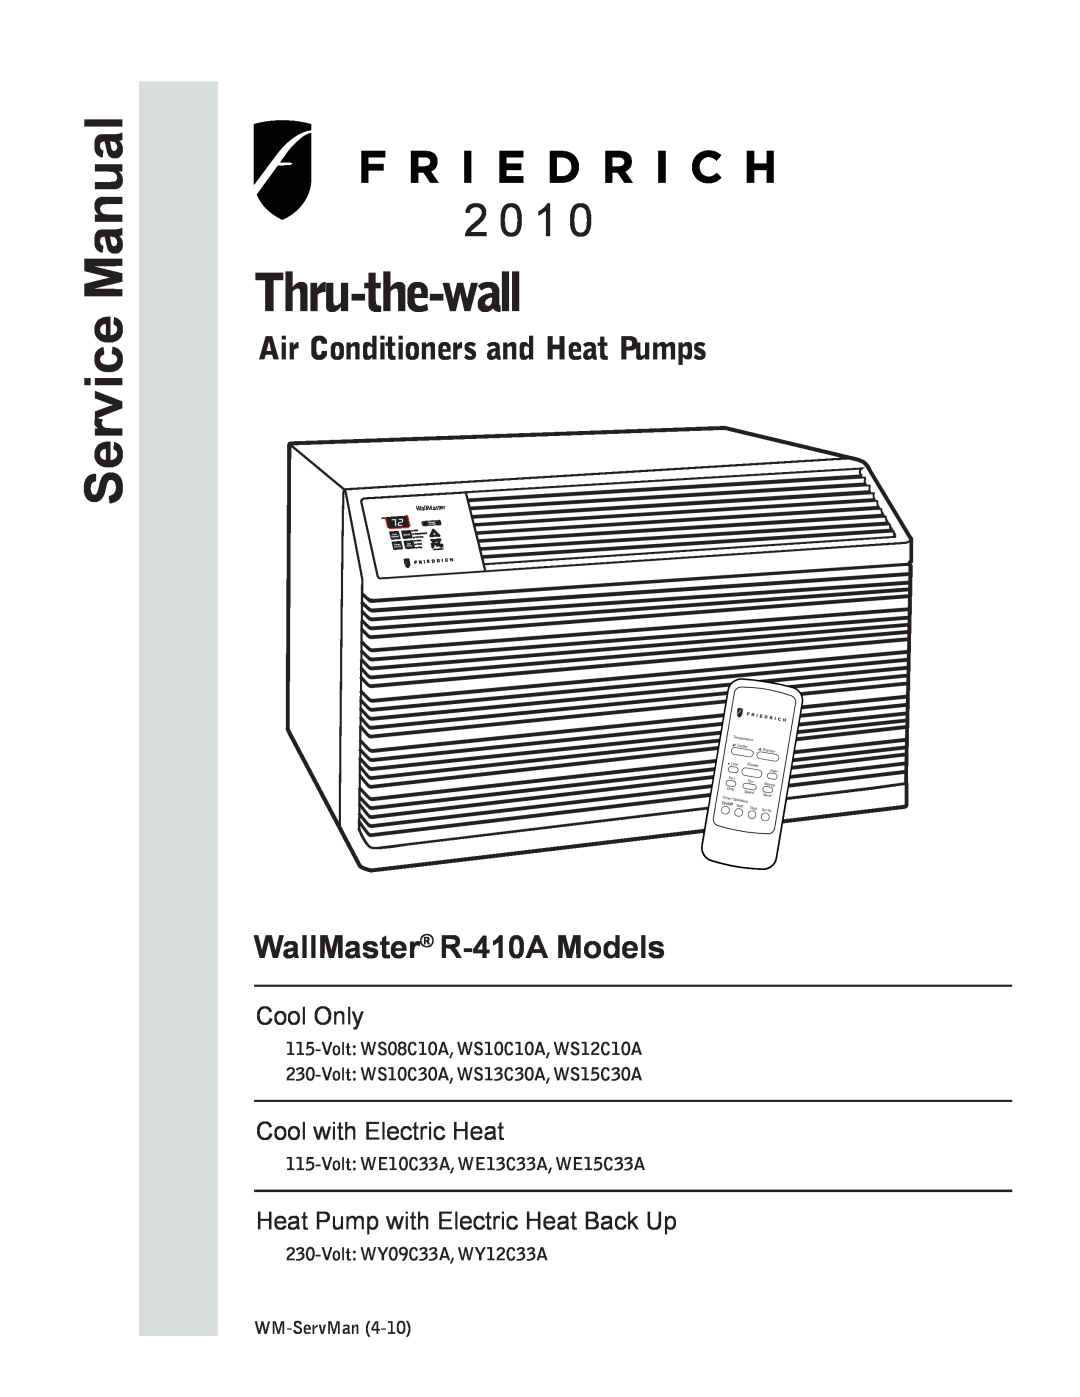 Friedrich WS10B10 service manual Air Conditioners and Heat Pumps, WallMaster R-410AModels, Cool Only, Thru-the-wall, Power 